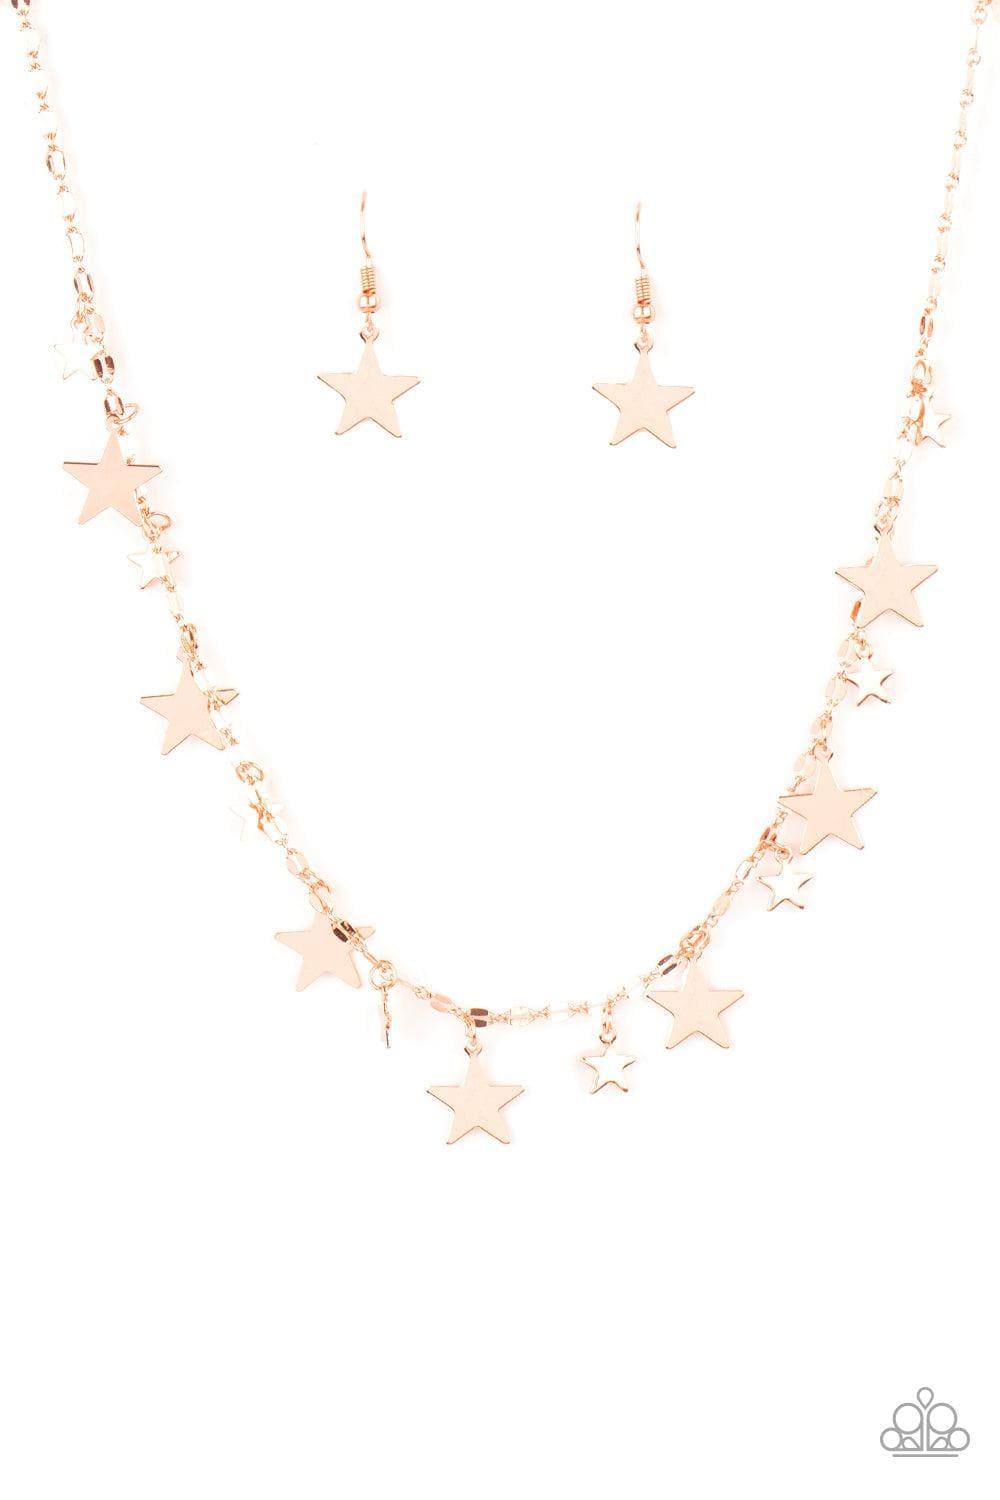 Paparazzi Accessories - Starry Shindig - Copper Dainty Necklace - Bling by JessieK